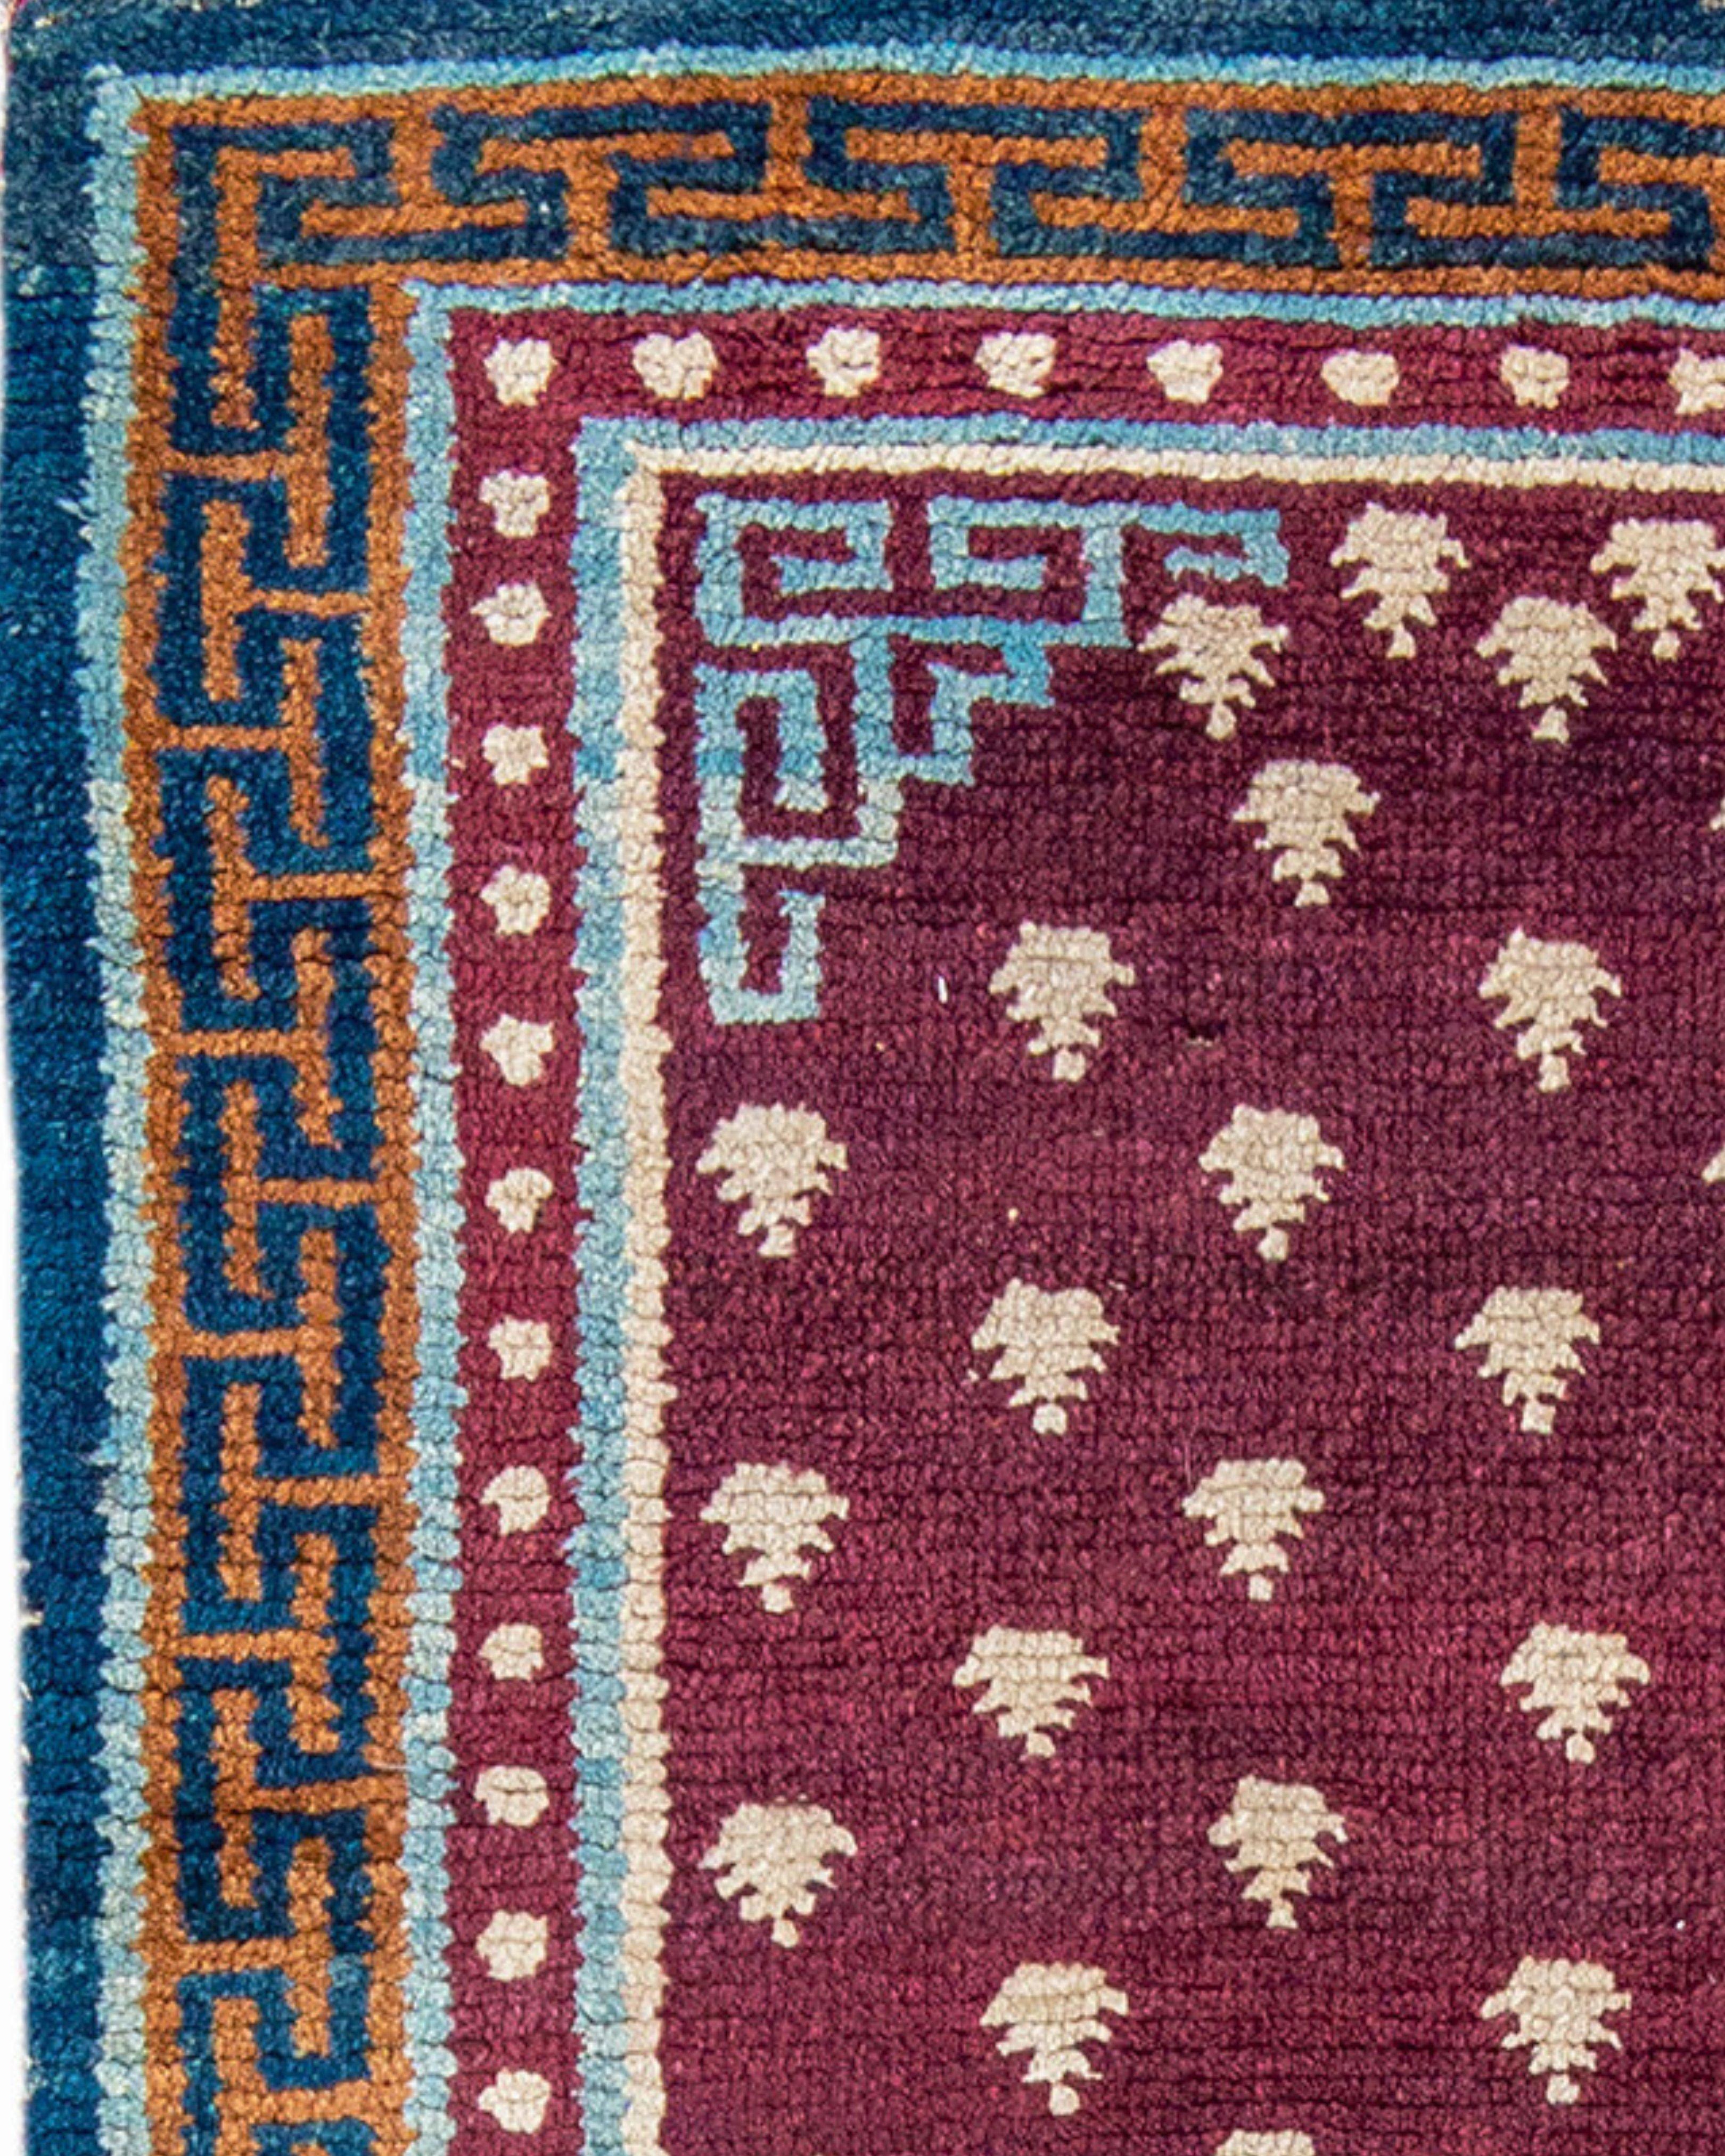 Antique Tibetan Rug, Mid-19th Century

One of the acknowledged older examples any collector could ever hope to acquire. Rugs of this size are called ‘khaden’ and are used as sleeping rugs on raised platforms or beds in their homes. The attractive